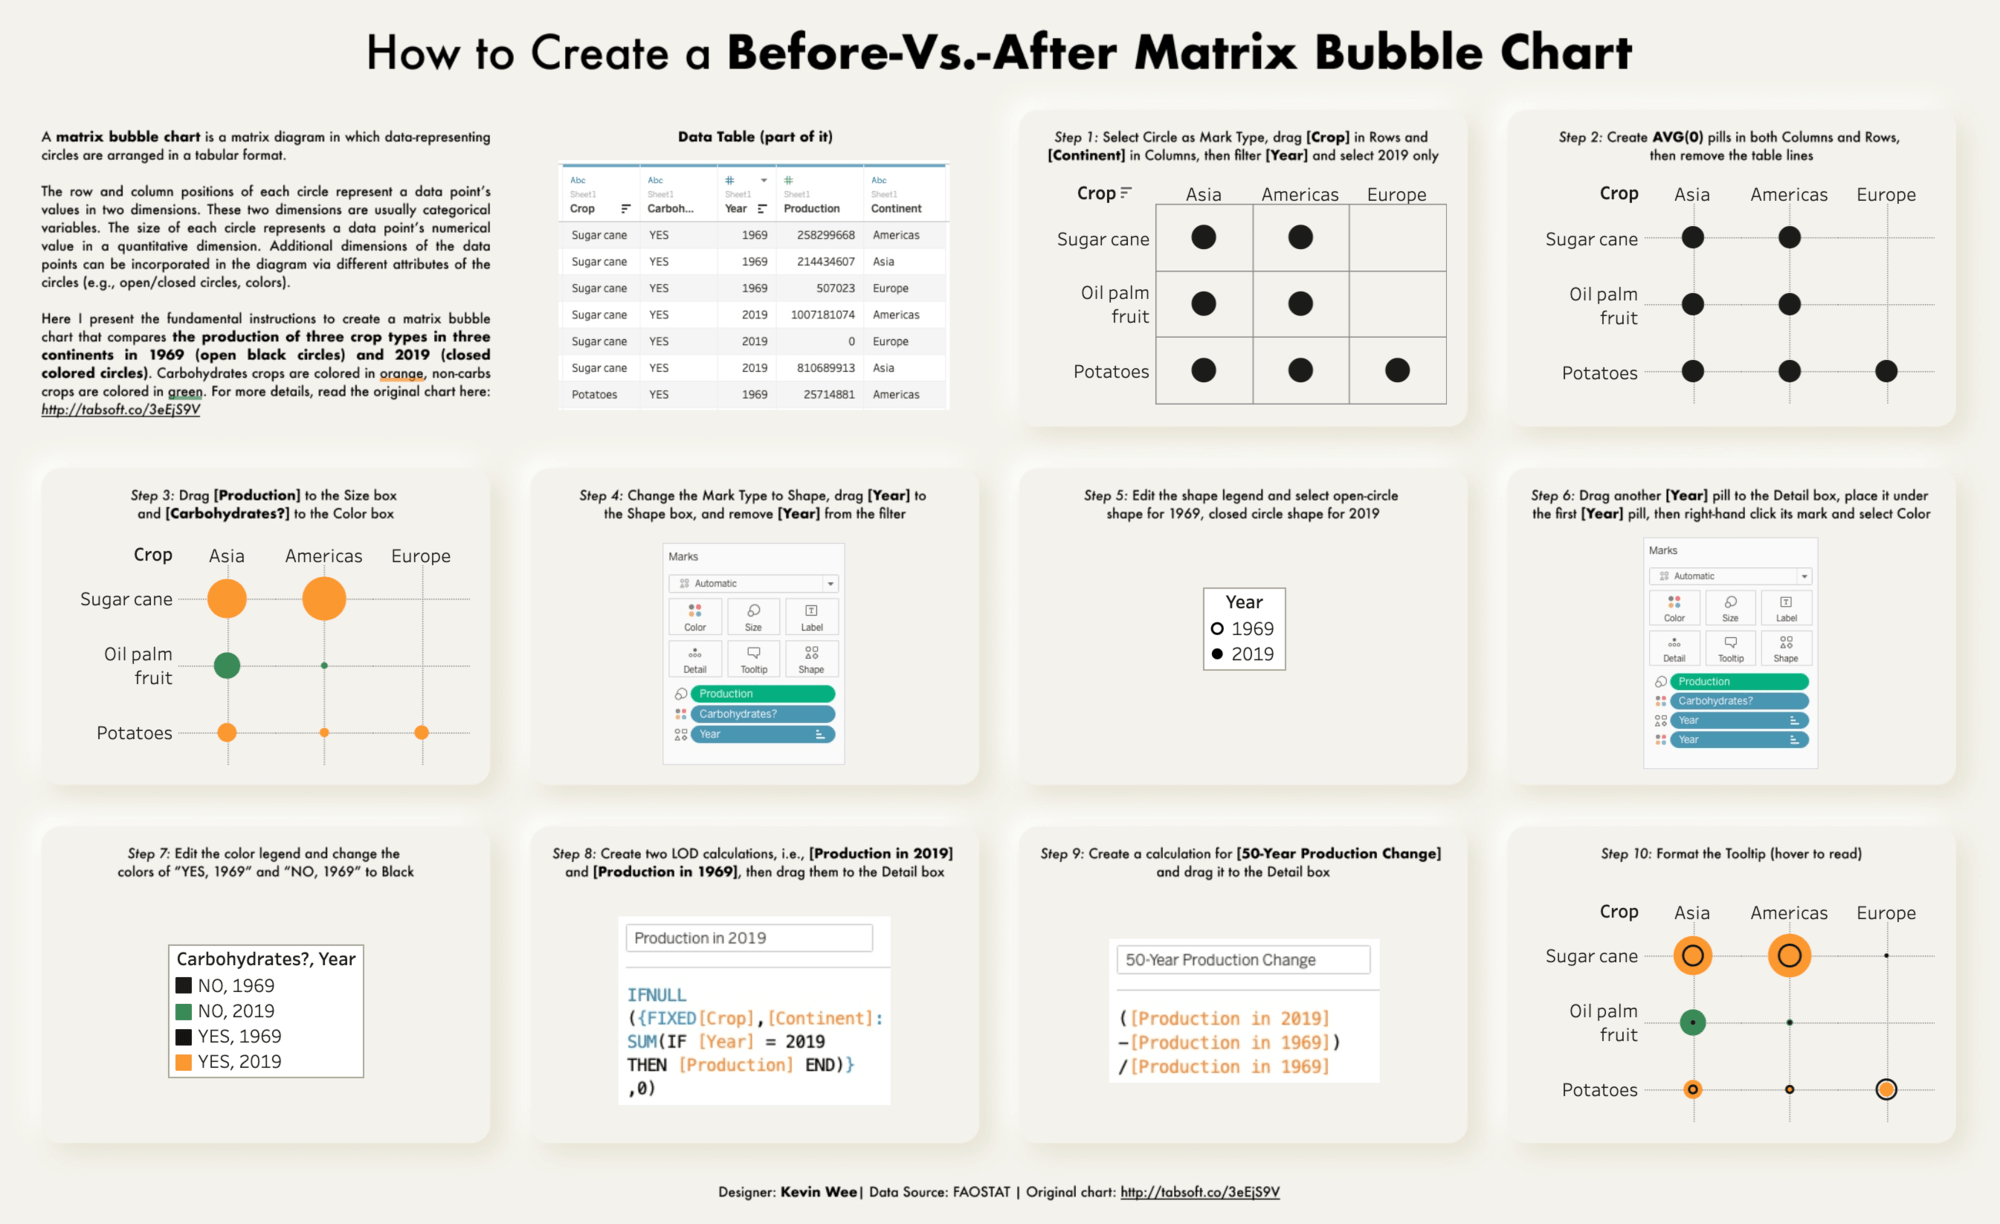 How to Create A Before-Vs.-After Matrix Bubble Chart (for #qualitative #dataviz)